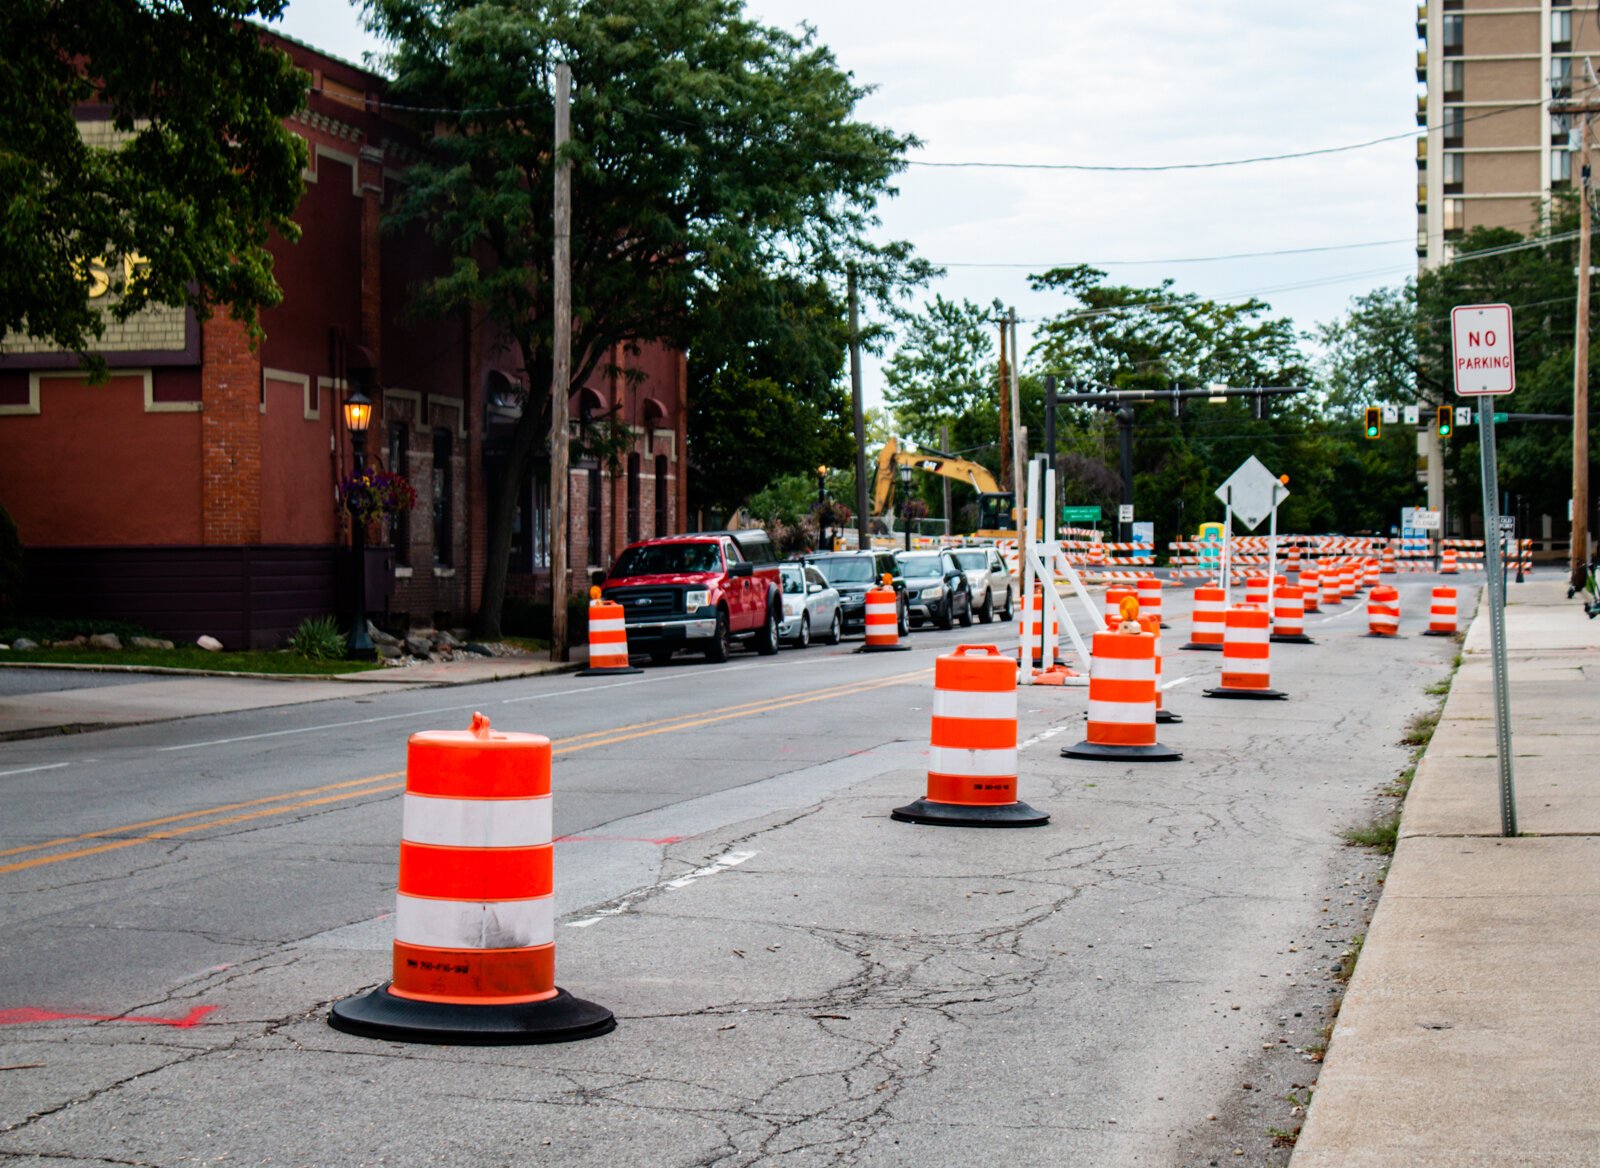 Construction on the North side of Downtown near Hall's Gas House has temporarily created some congestion in the area.